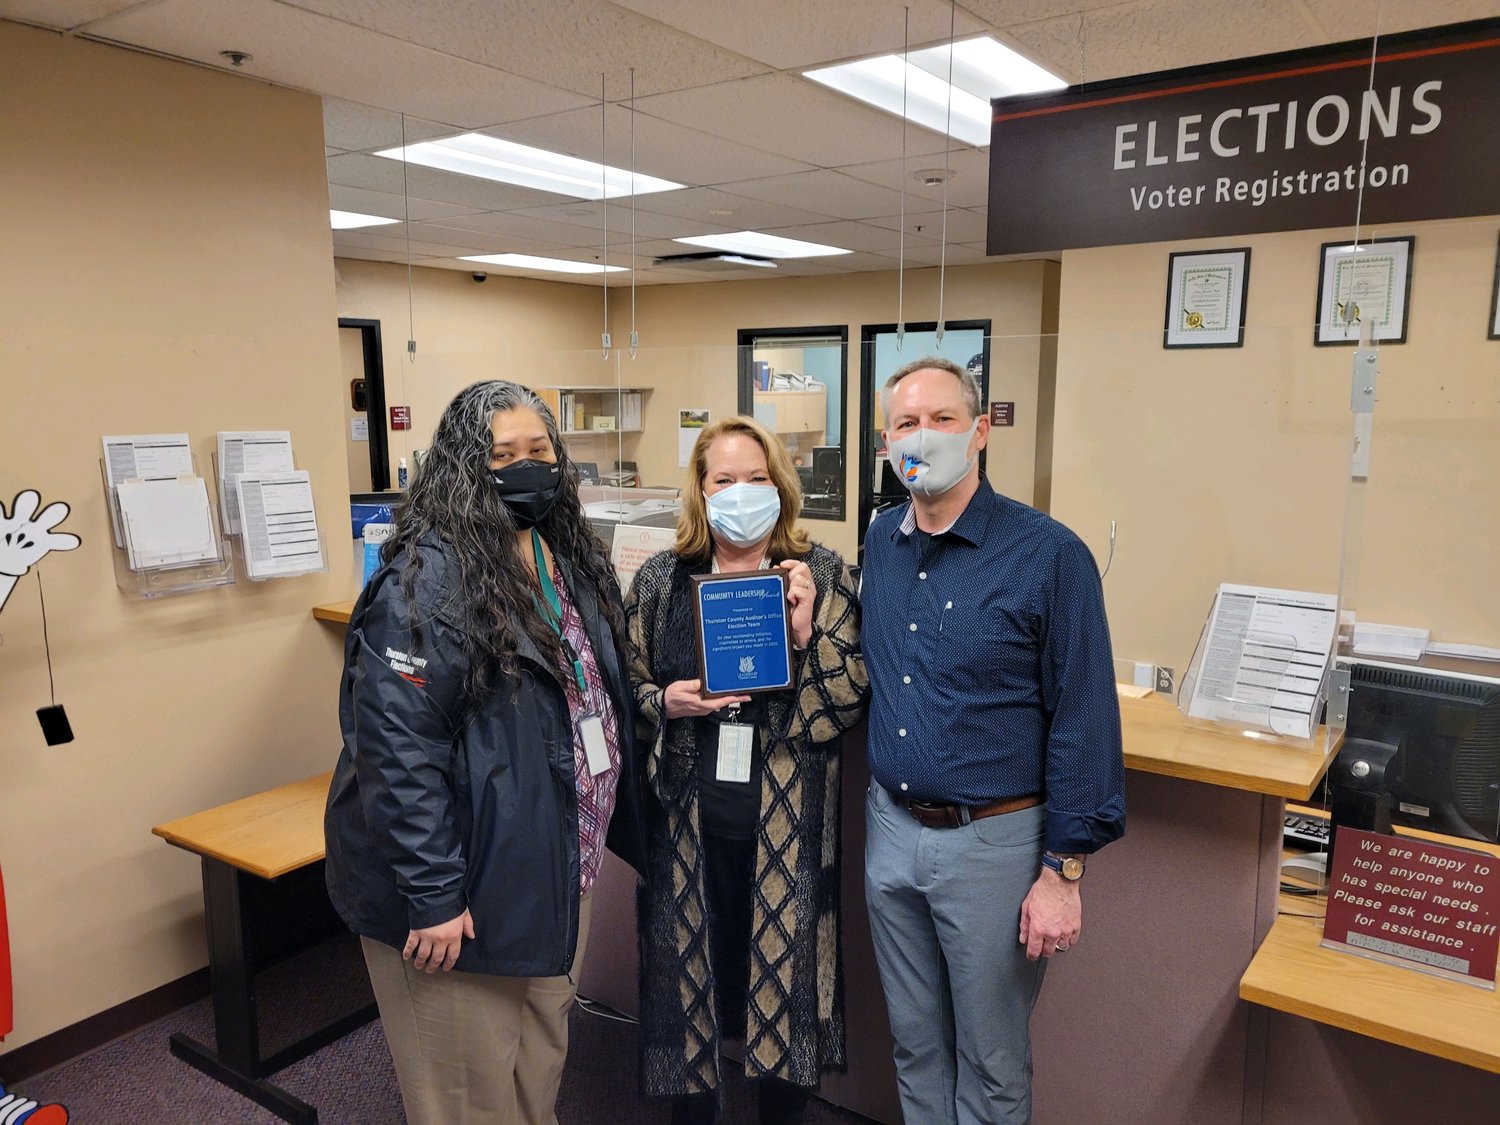 The Thurston County Auditor's Office Election team received a 2020 Community Leadership Award from Leadership Thurston County (LTC).